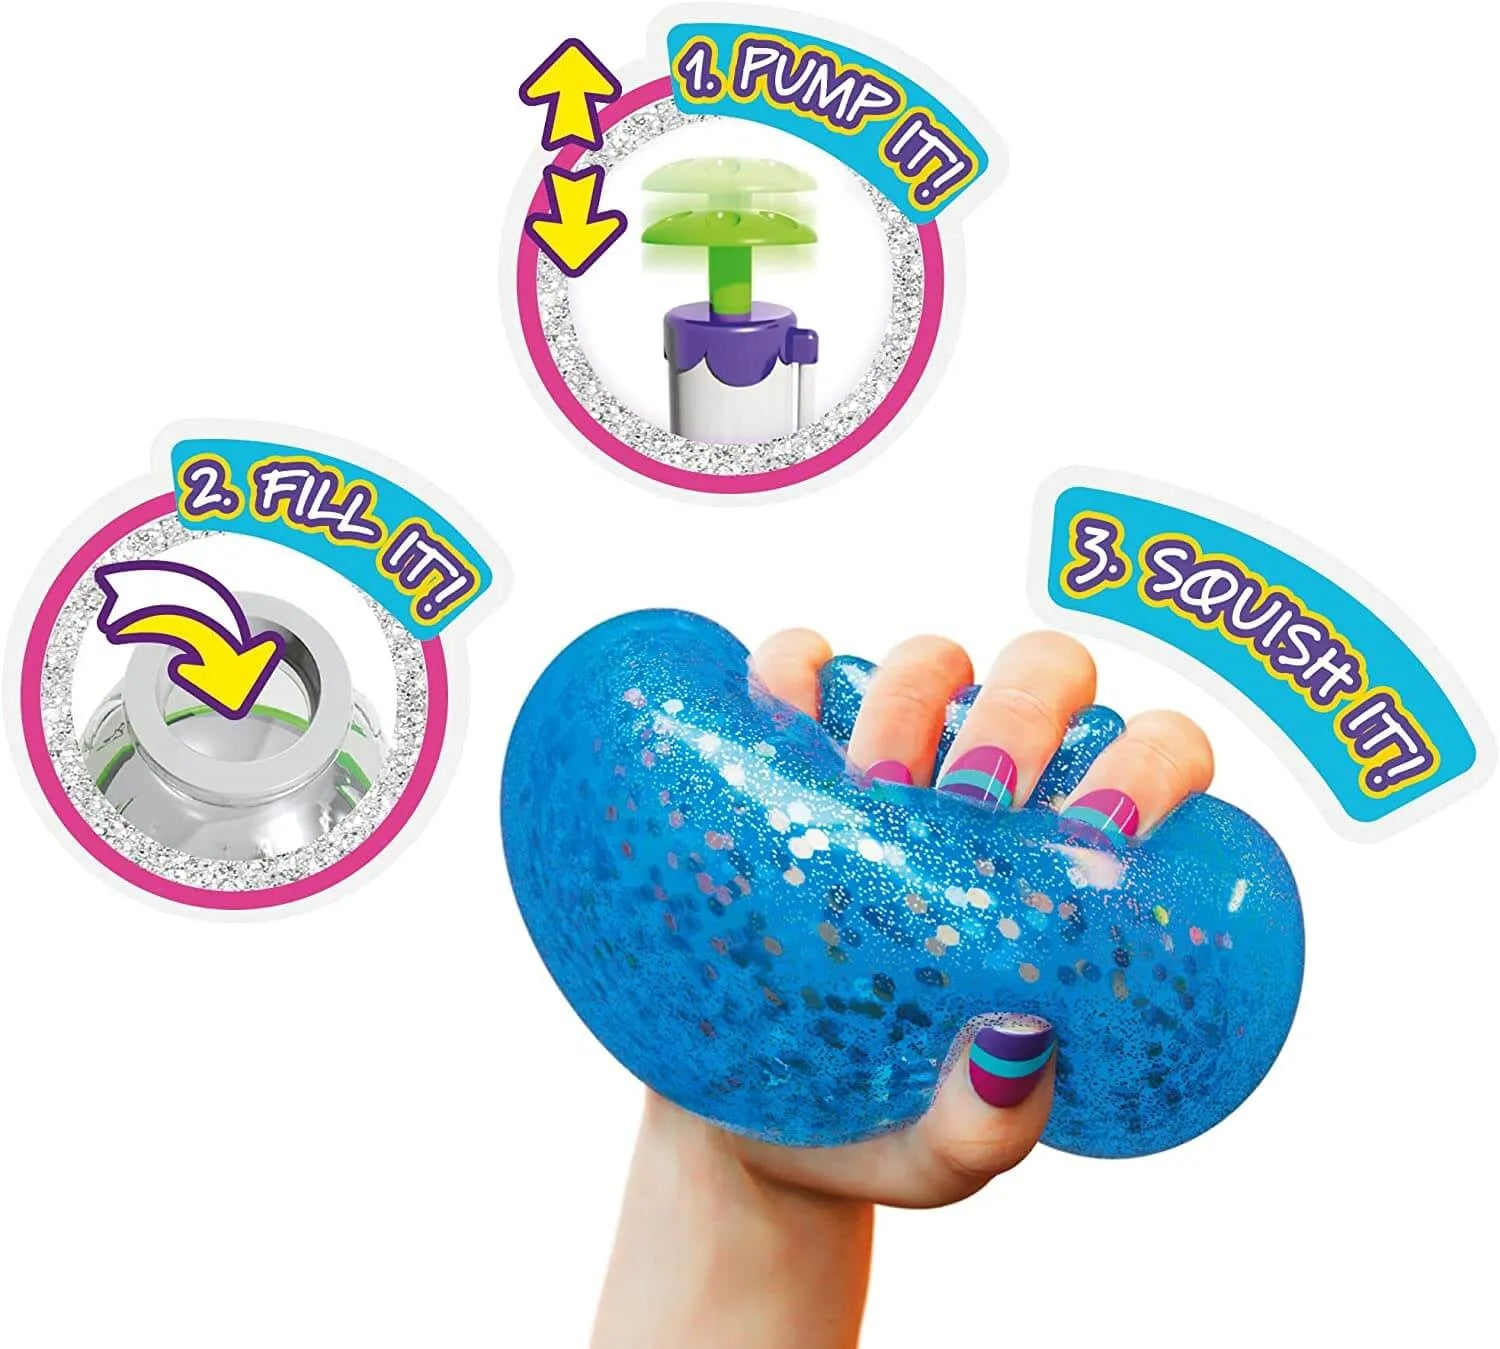 Create super slime with Doctor Squish - Squishy Maker from Doctor Squish - John Adams